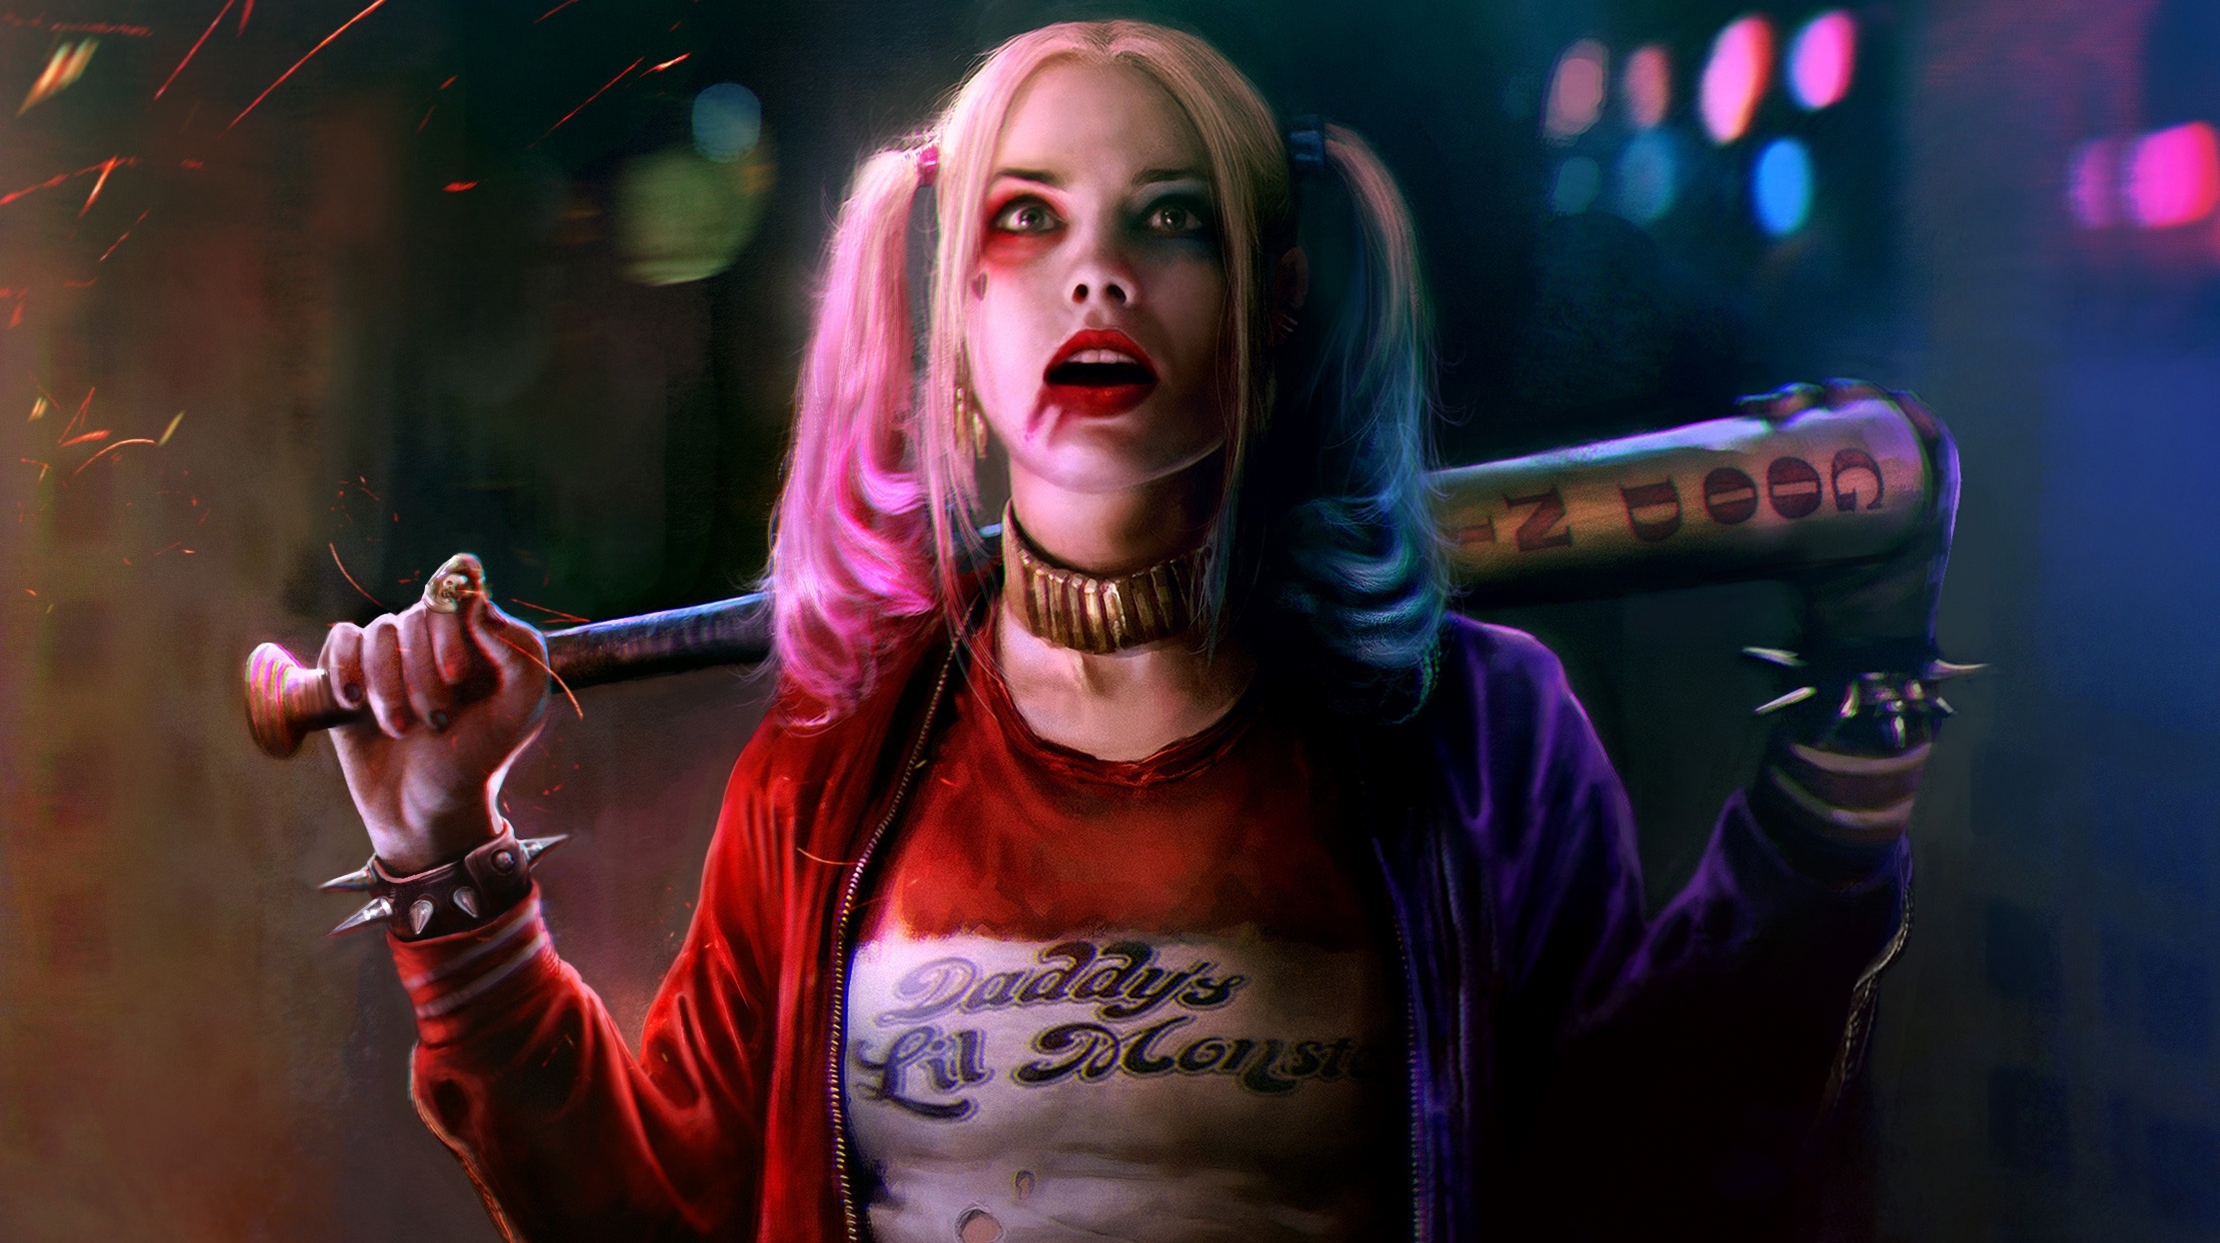 blonde, movie, margot robbie, dc comics, harley quinn, collar, suicide squad, baseball bat, spikes, two toned hair